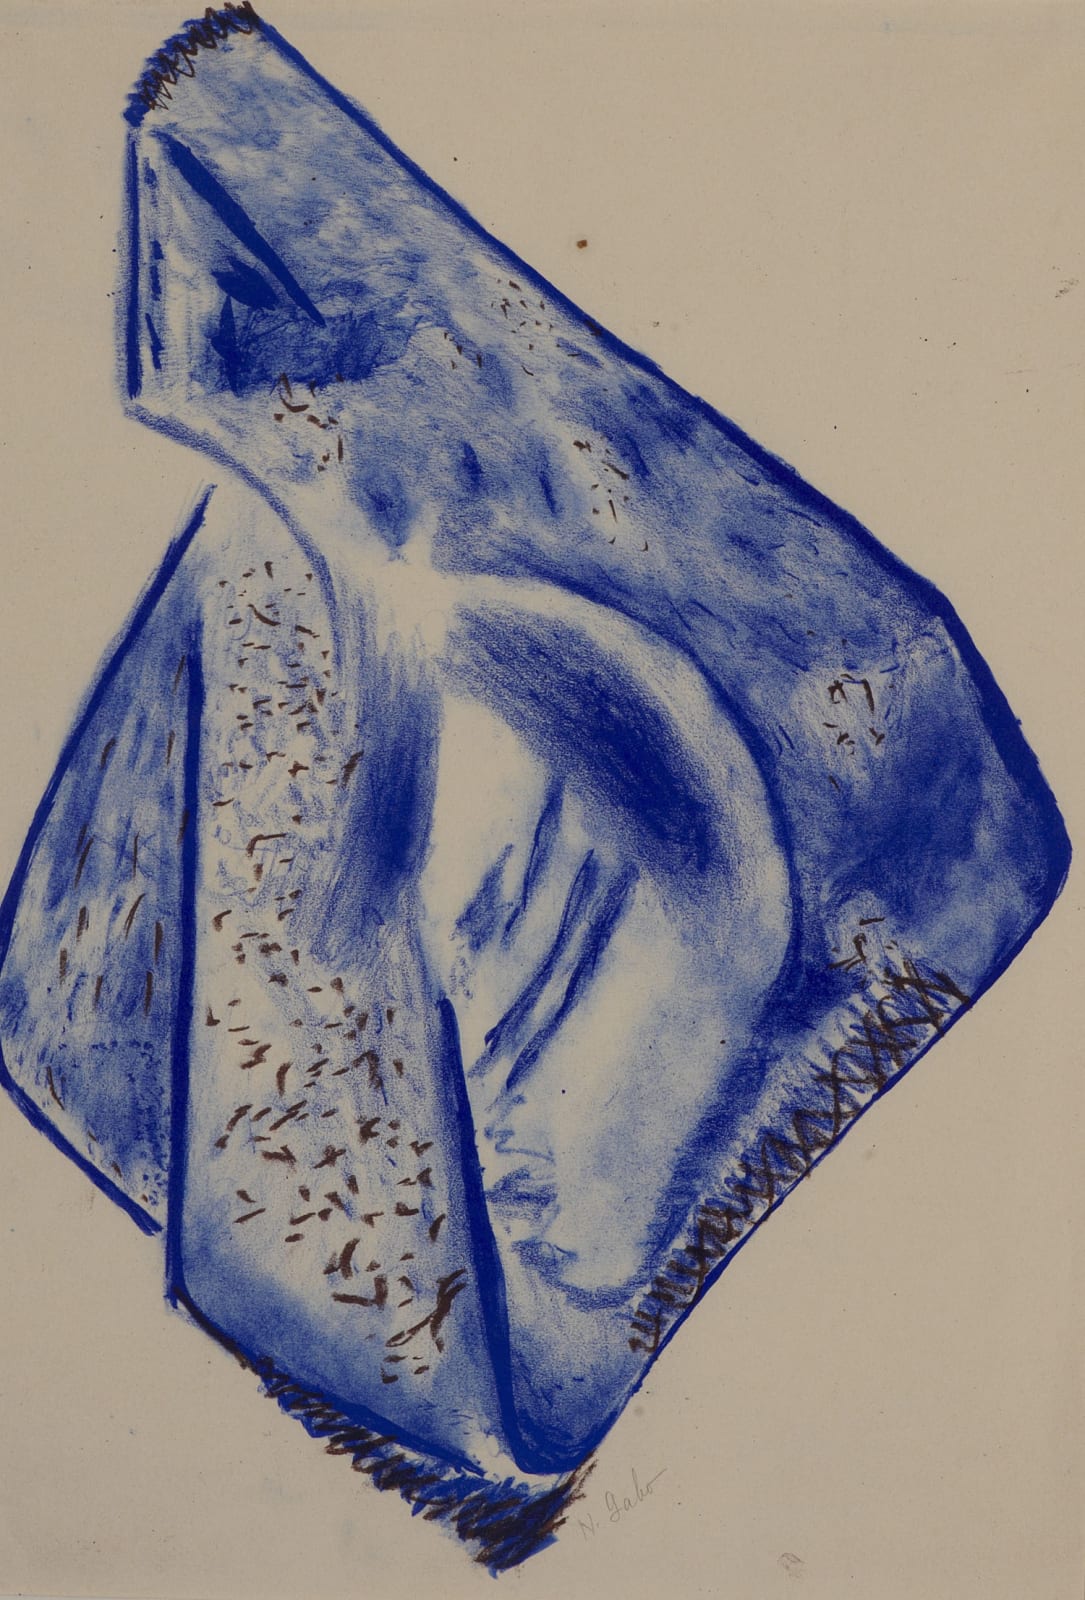 Naum Gabo (1890-1977) Opus XIX (Composition in Blue) 1969 Lithograph on paper 44.4 x 31 cm Ben Uri Collection © Naum Gabo estate To see and discover more about this artist click here